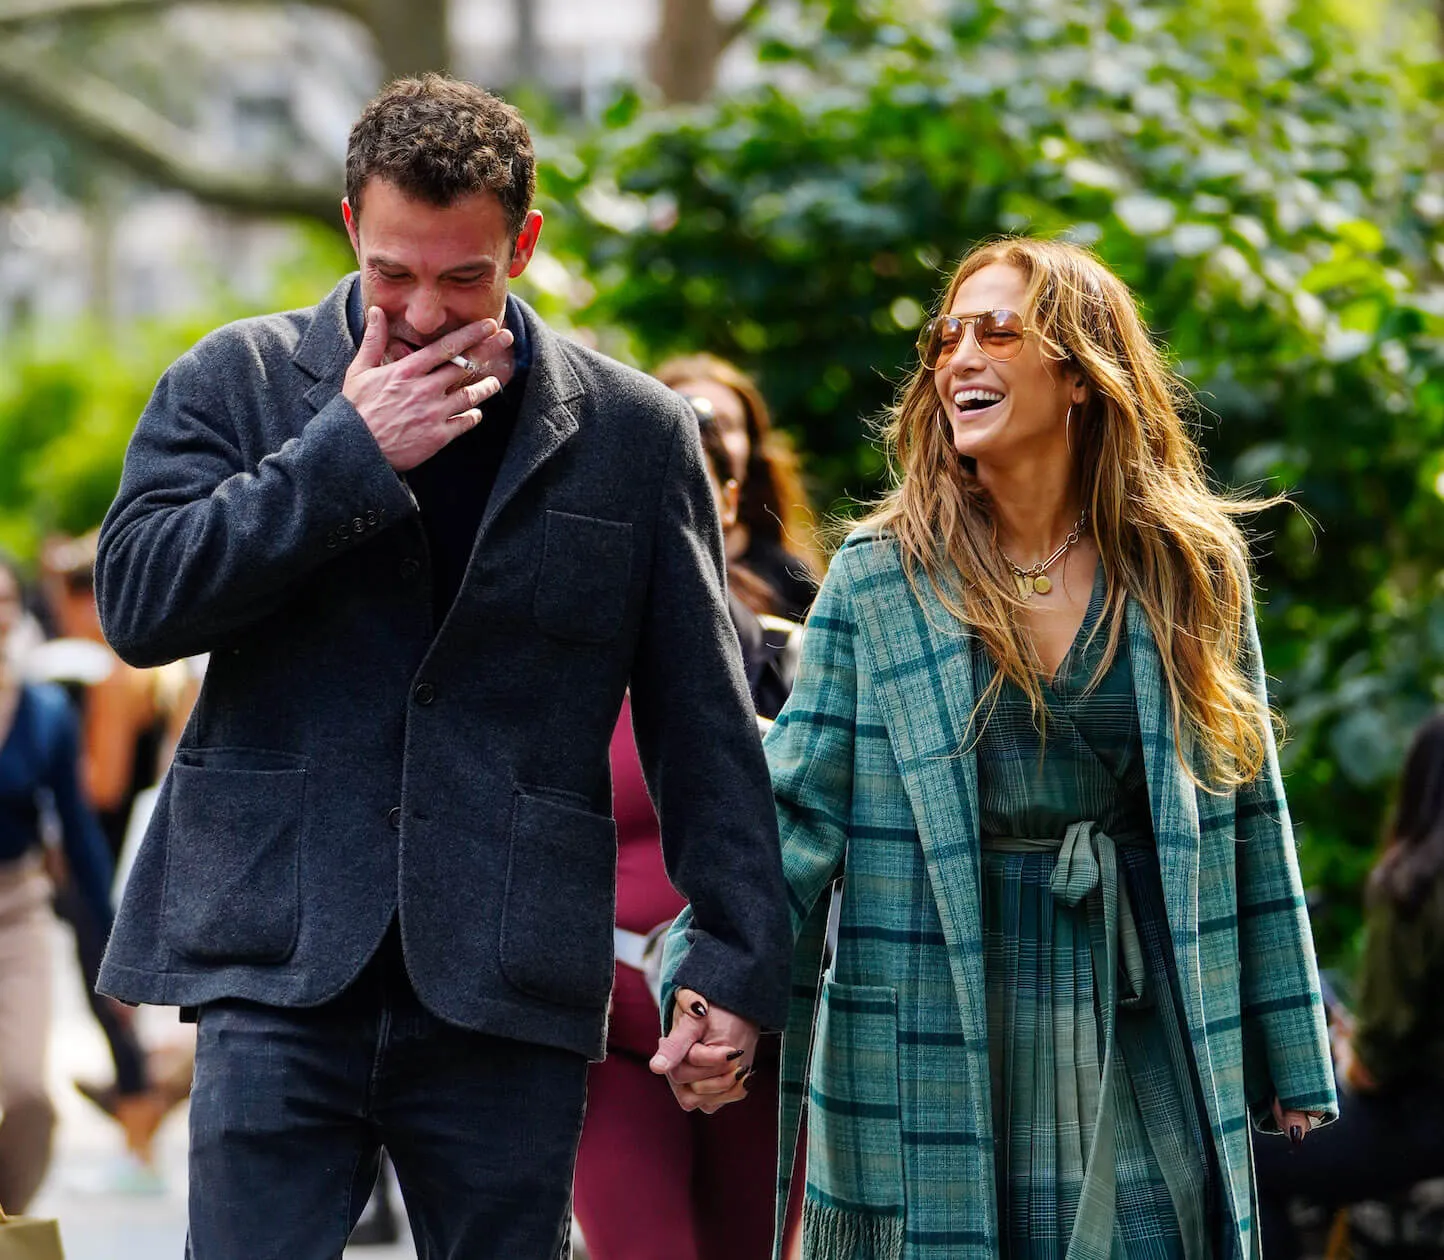 Ben Affleck smoking a cigarette and walking with Jennifer Lopez, who's laughing